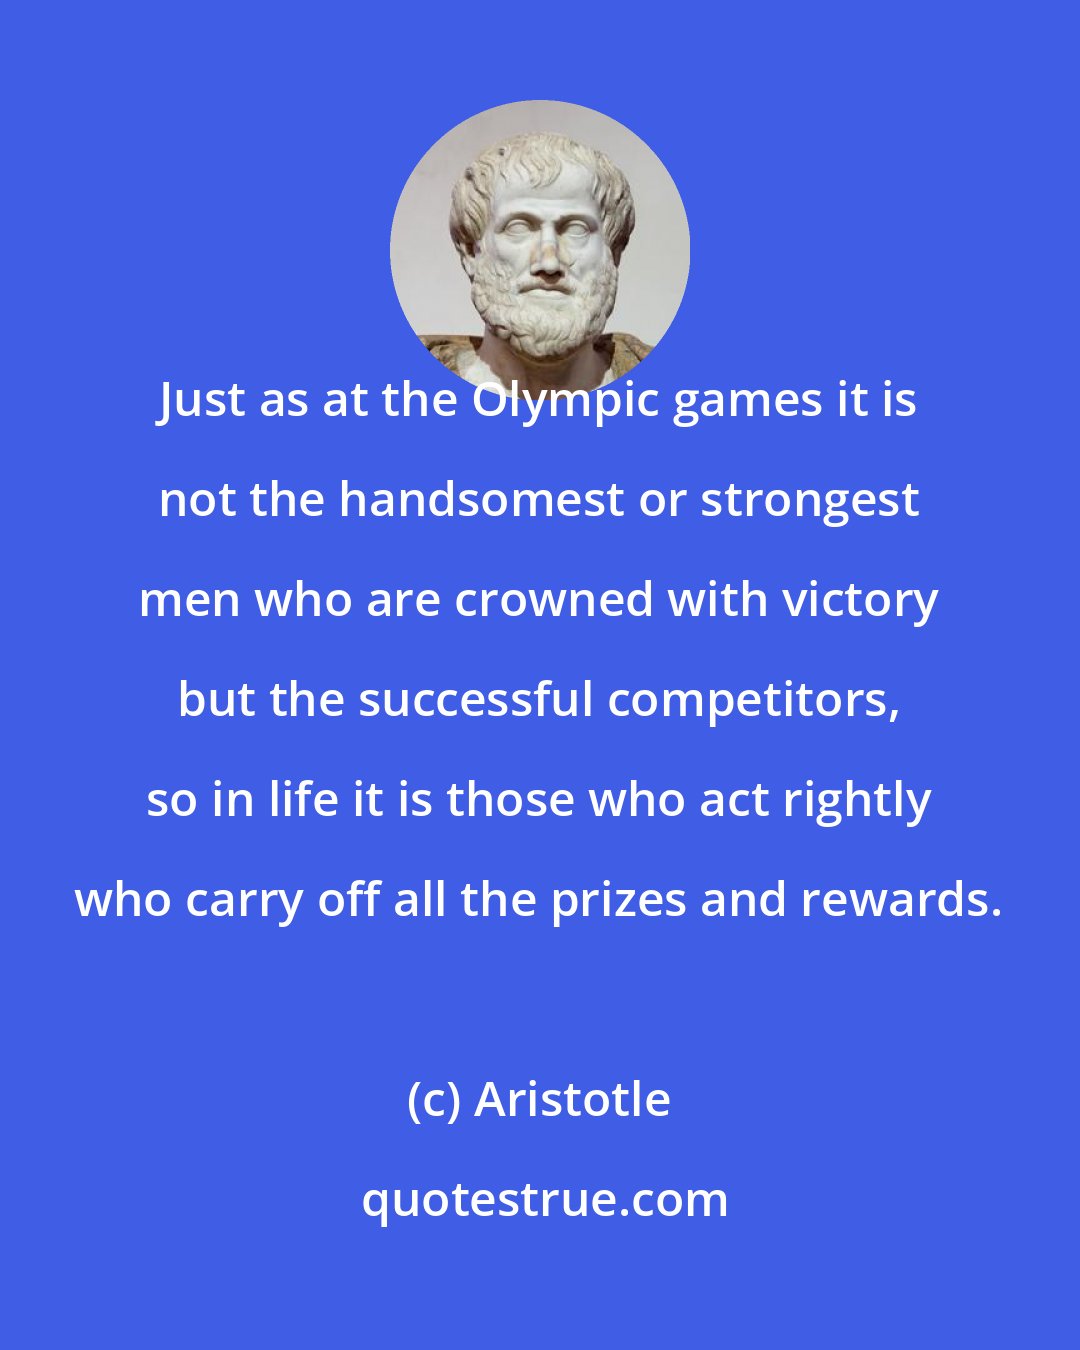 Aristotle: Just as at the Olympic games it is not the handsomest or strongest men who are crowned with victory but the successful competitors, so in life it is those who act rightly who carry off all the prizes and rewards.